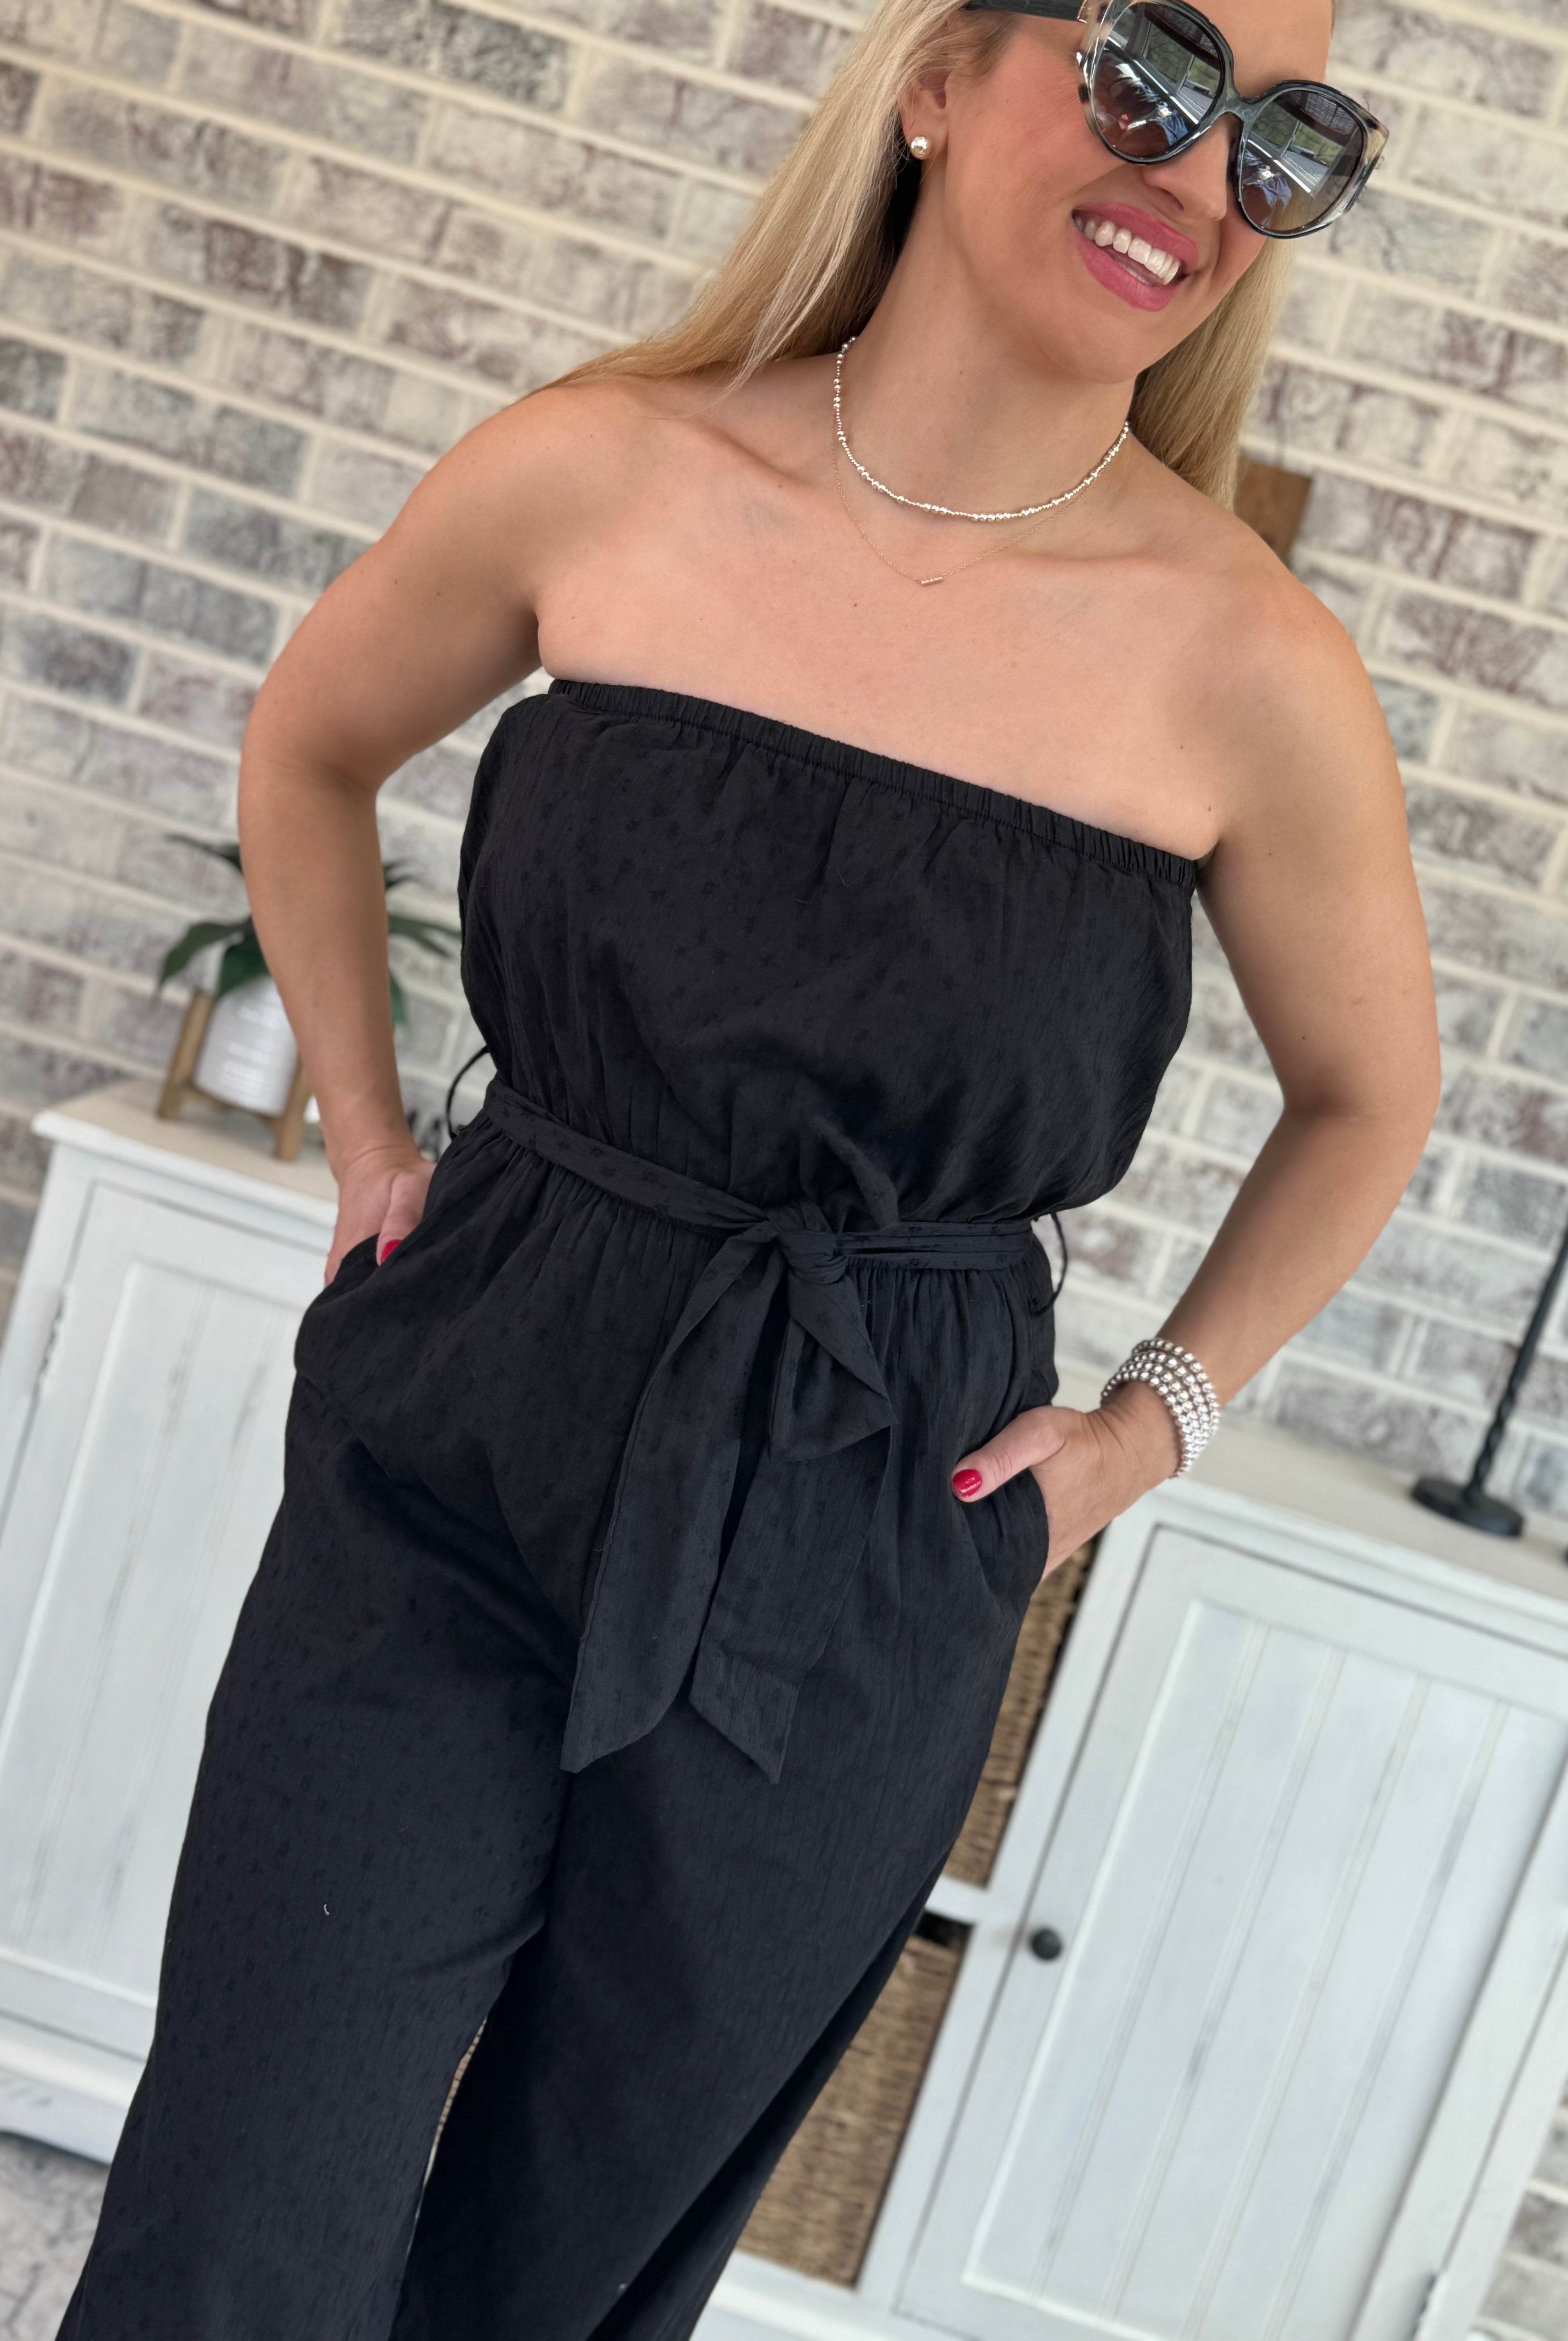 Summer Lovin' Jumpsuit-190 Rompers/Jumpsuits/Sets-The Lovely Closet-The Lovely Closet, Women's Fashion Boutique in Alexandria, KY